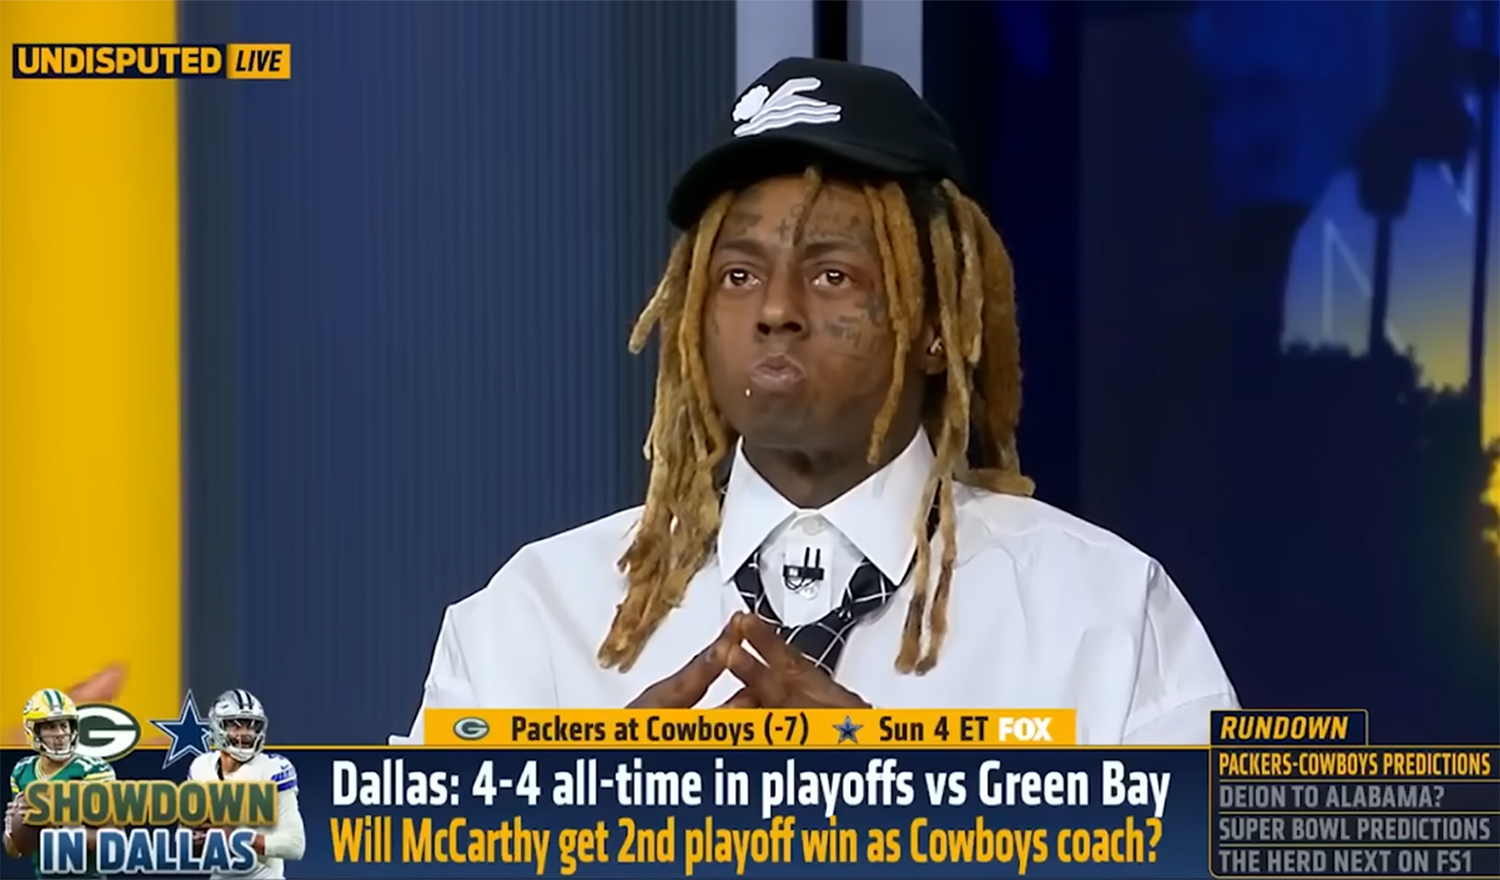 Lil Wayne Talks Green Bay Packers vs Dallas Cowboys NFL Game, Confirms He Will Be In Attendance